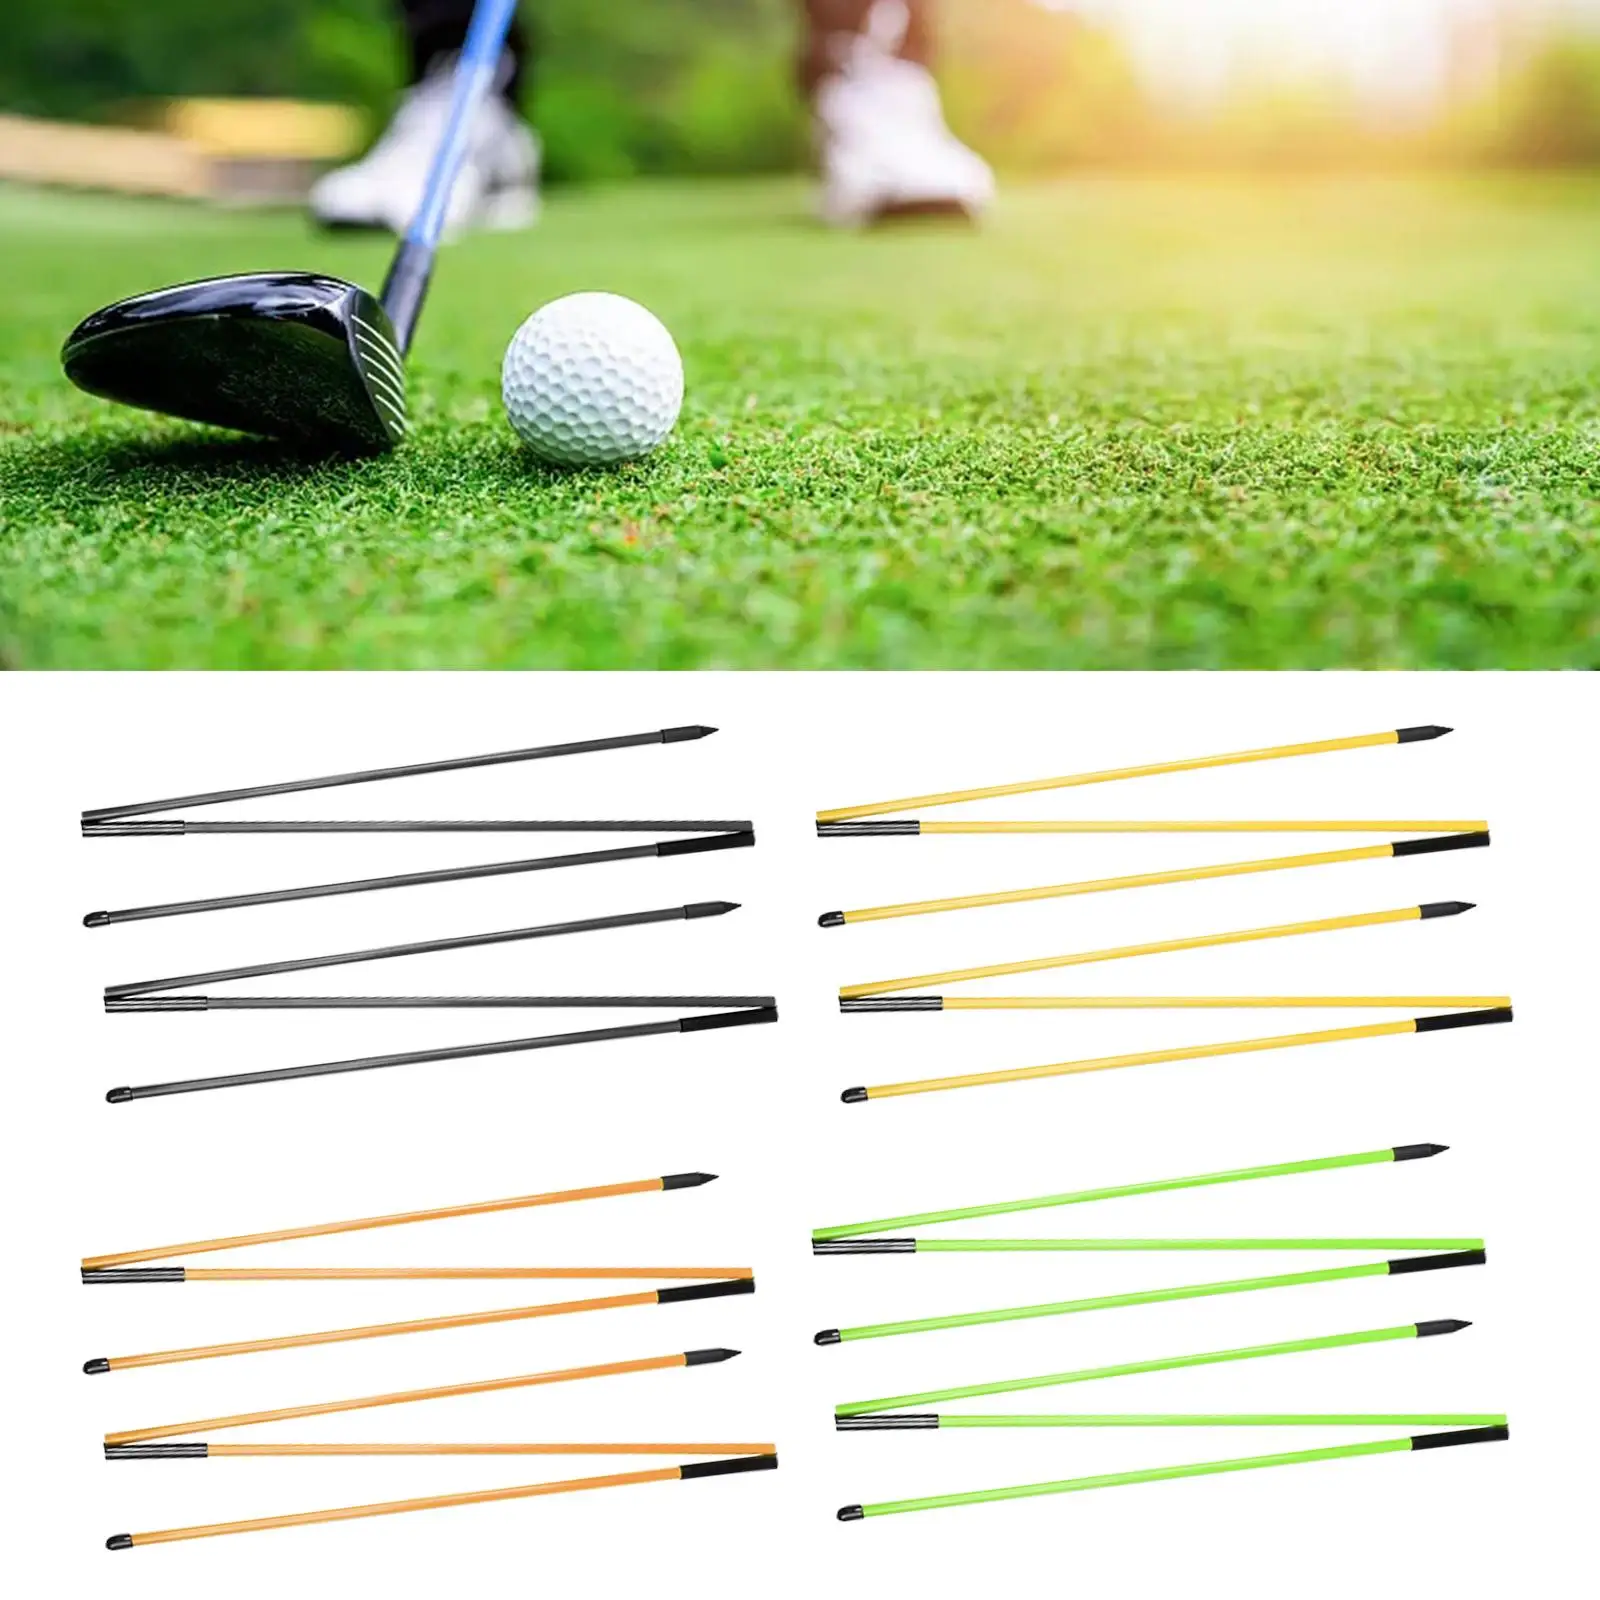 2 Pieces Golf Alignment Sticks Golf Swing Trainer Foldable Alignment Rods Golf